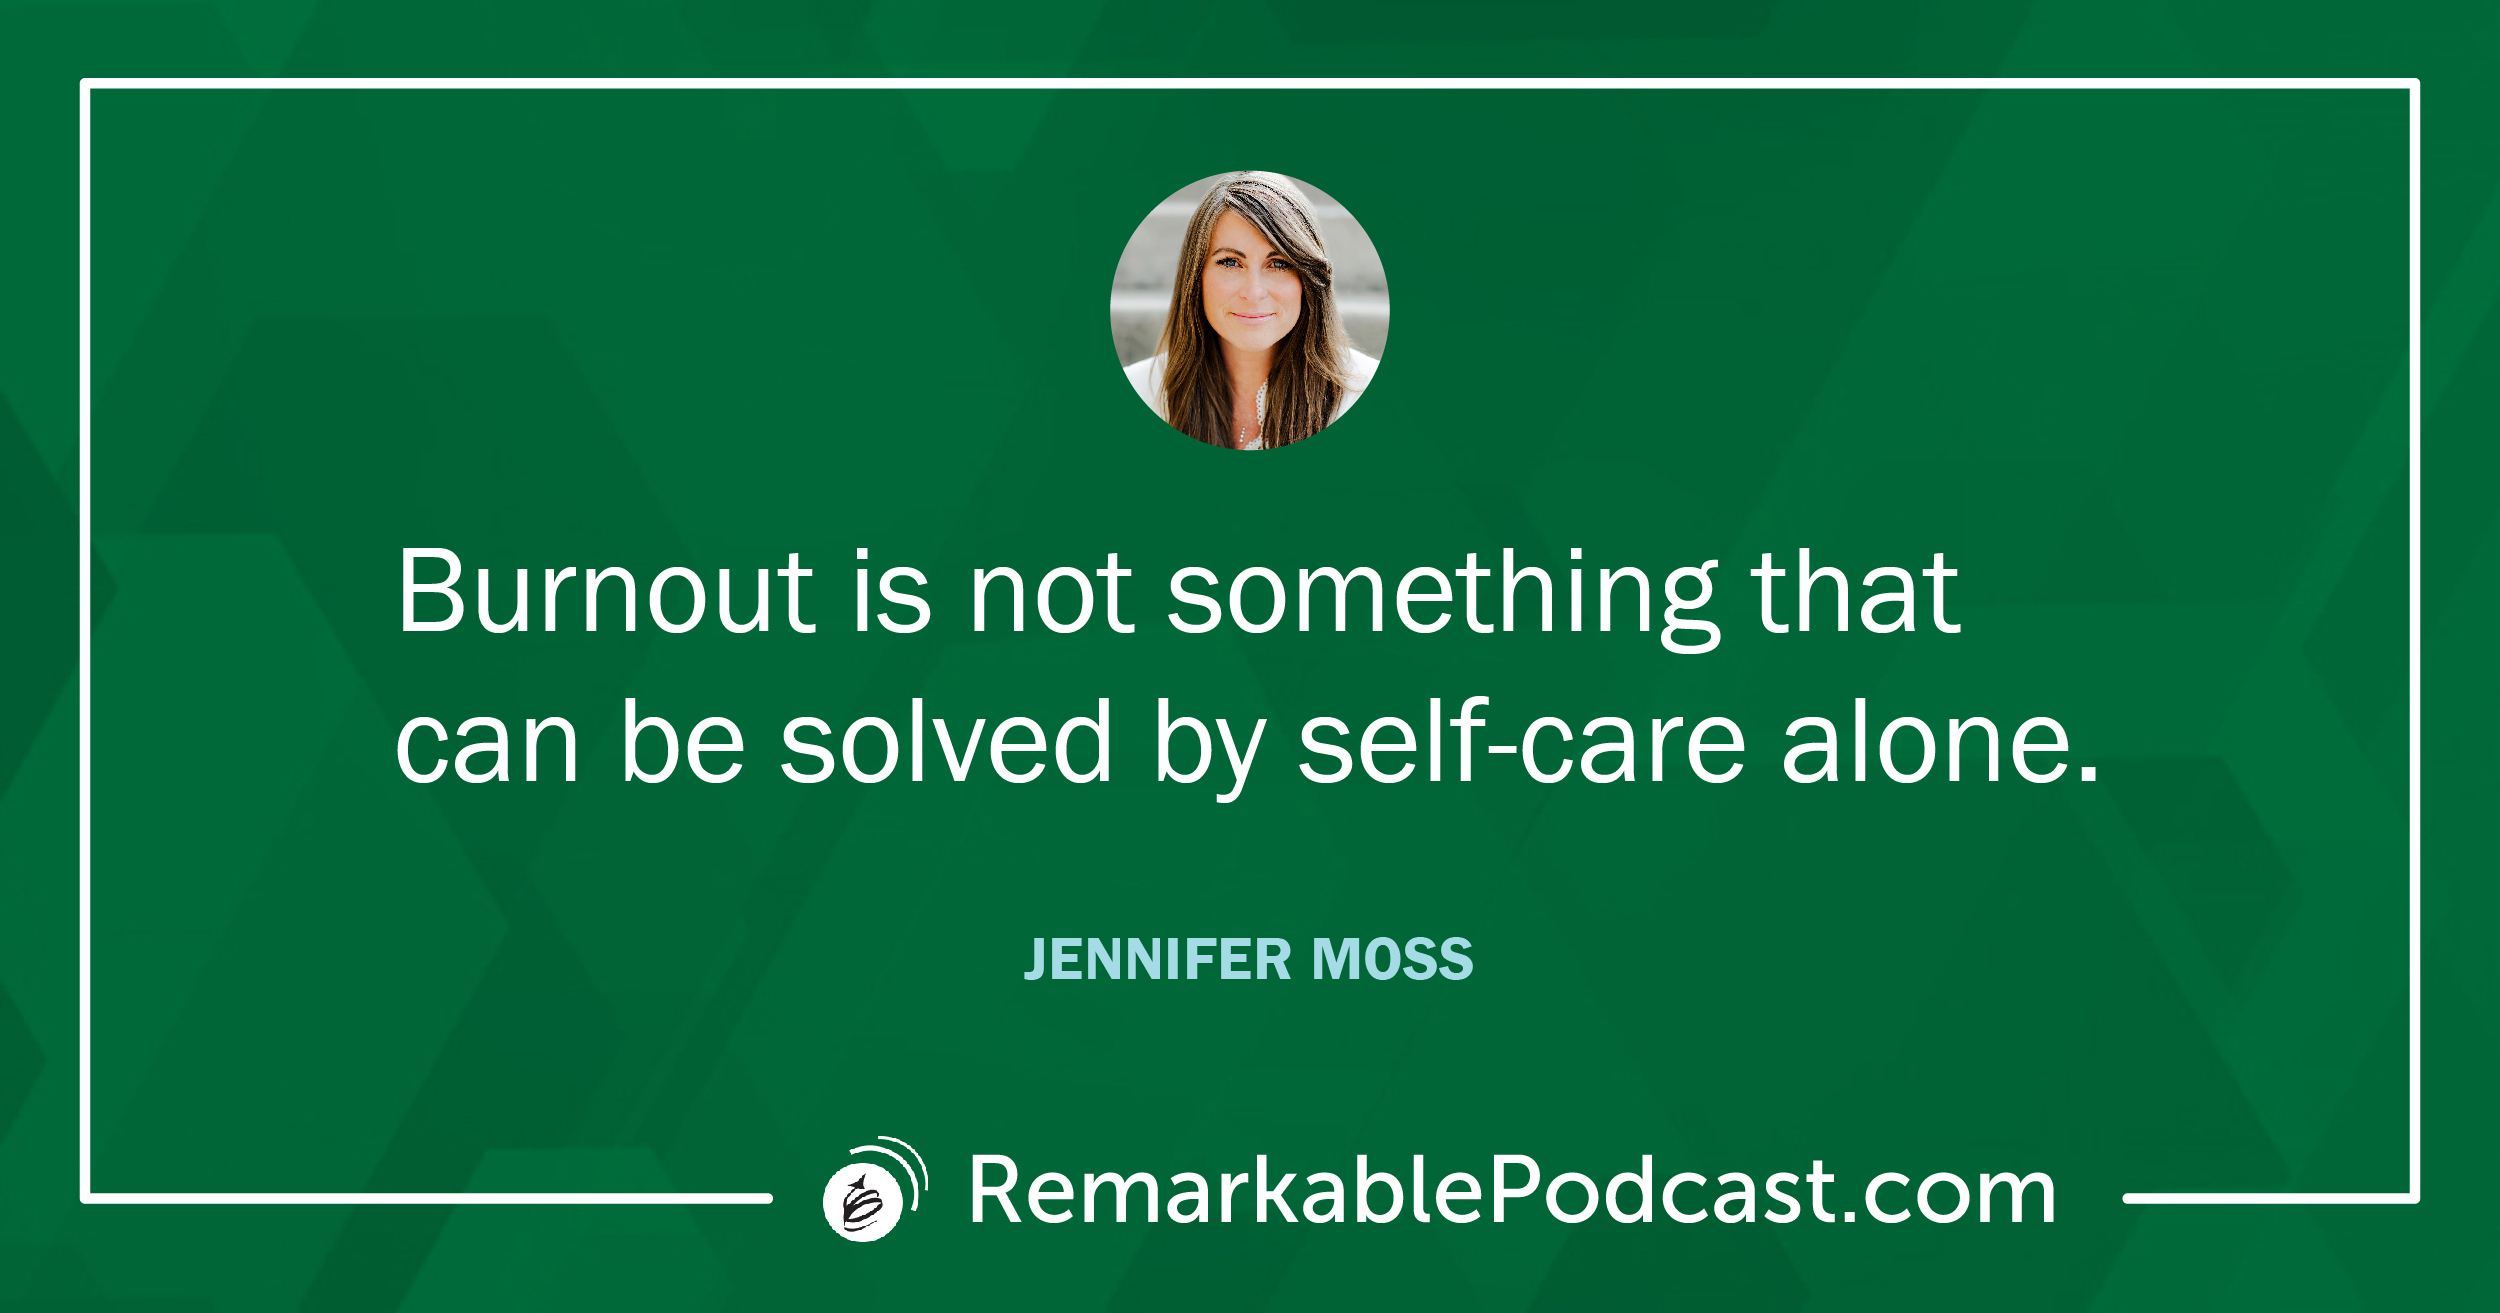 Quote Image: Burnout is not something that can be solved by self-care alone. Said by Jennifer Moss